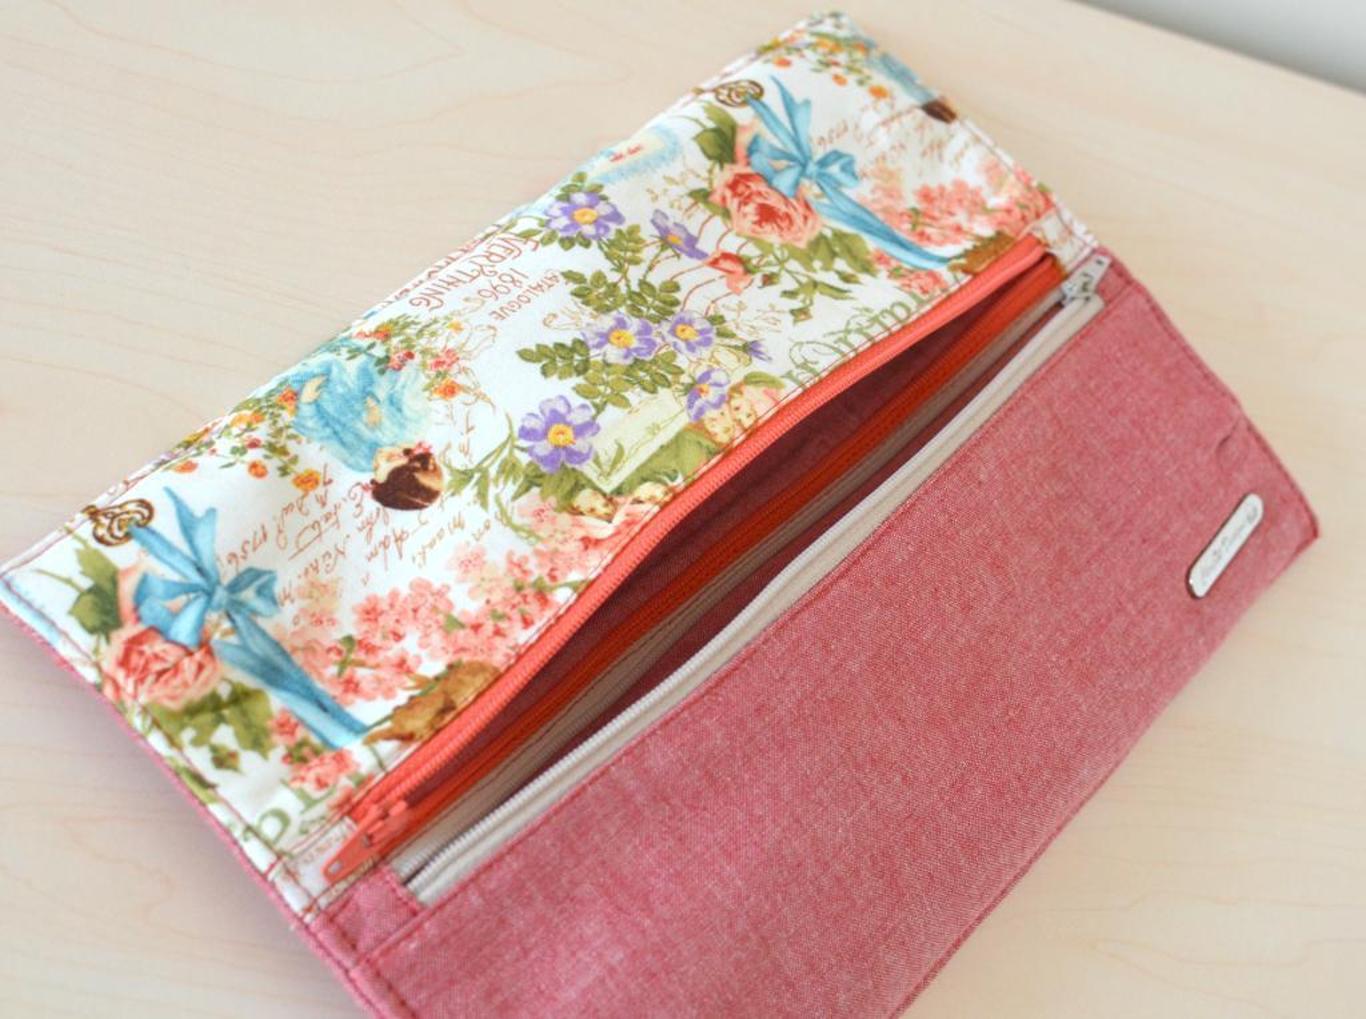 FREE PATTERN ALERT 20 Handbags And Purses On The Cutting Floor 